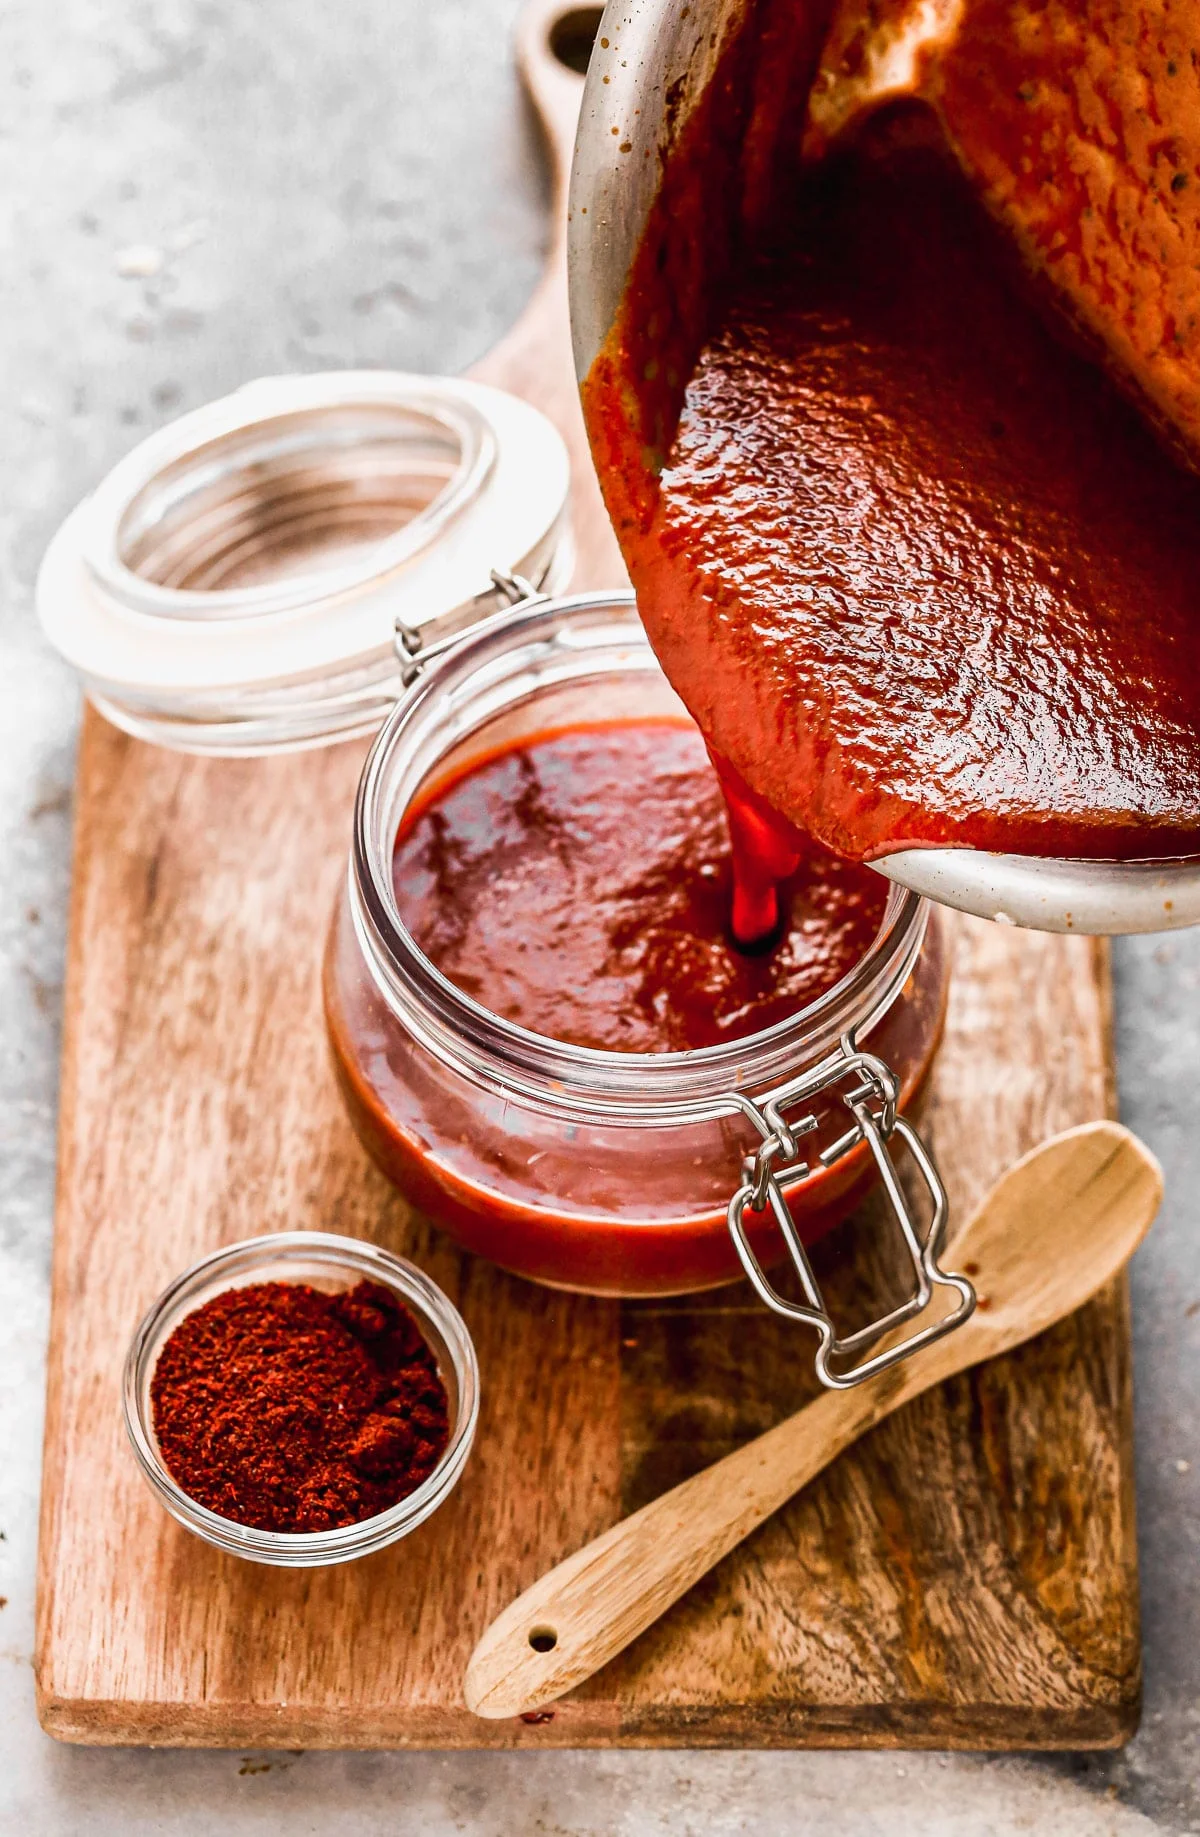 With just a few staple pantry ingredients and 15 minutes of your time, you can whip up an Enchilada Sauce Recipe infinitely better than anything you'll find at the grocery store. Our version is tangy, smoky, and slightly sweet with just a touch of heat. Perfect on enchiladas, tacos, or quick tex-mex inspired pastas.